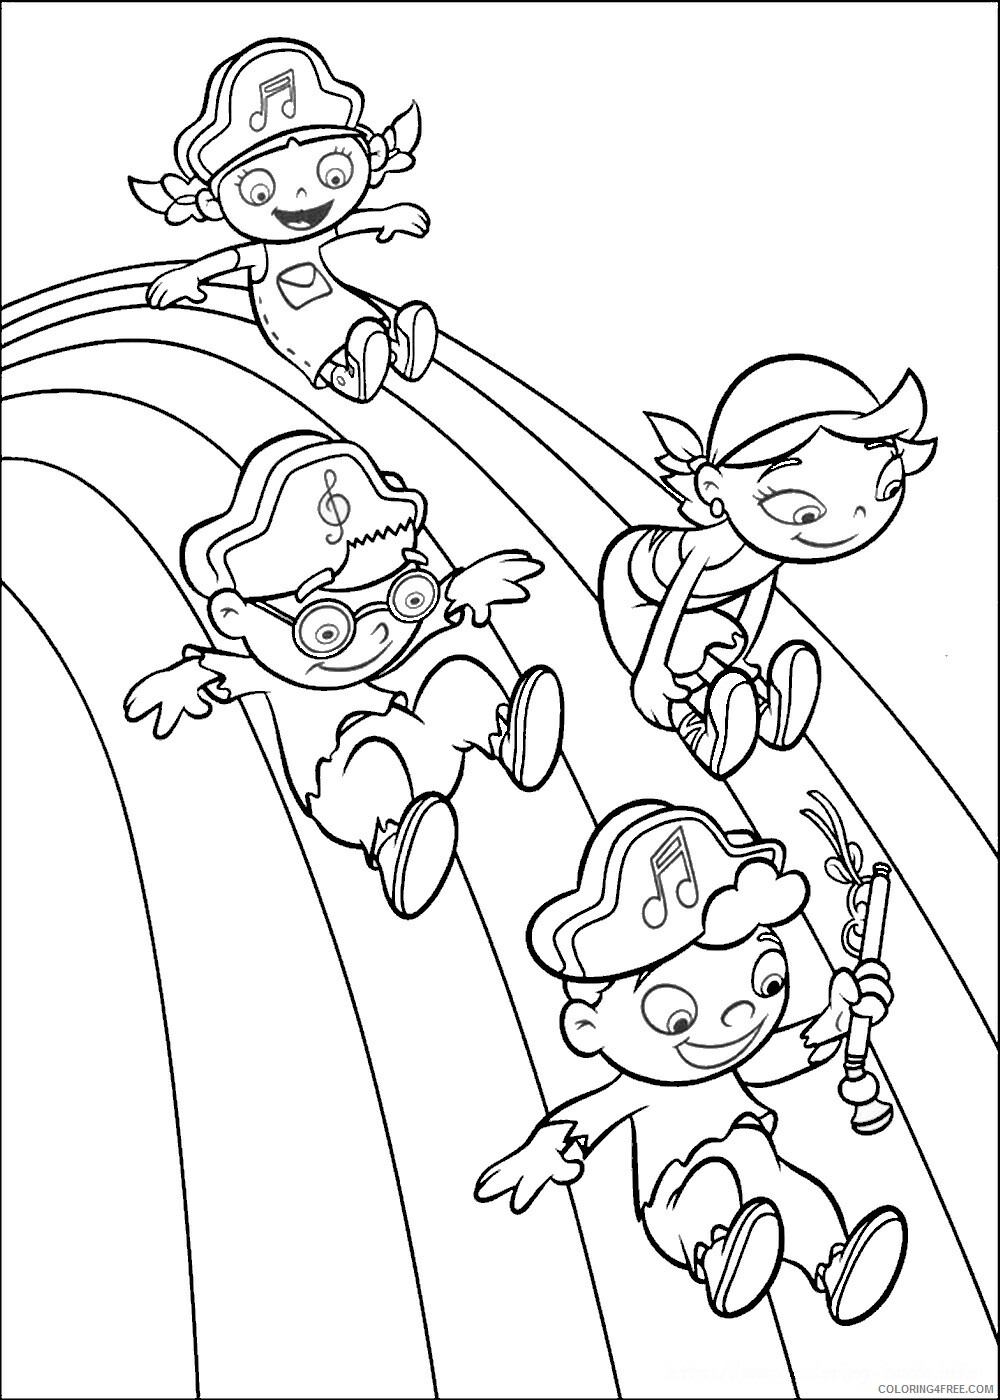 Little Einsteins Coloring Pages TV Film little_einsteins_13 Printable 2020 04477 Coloring4free